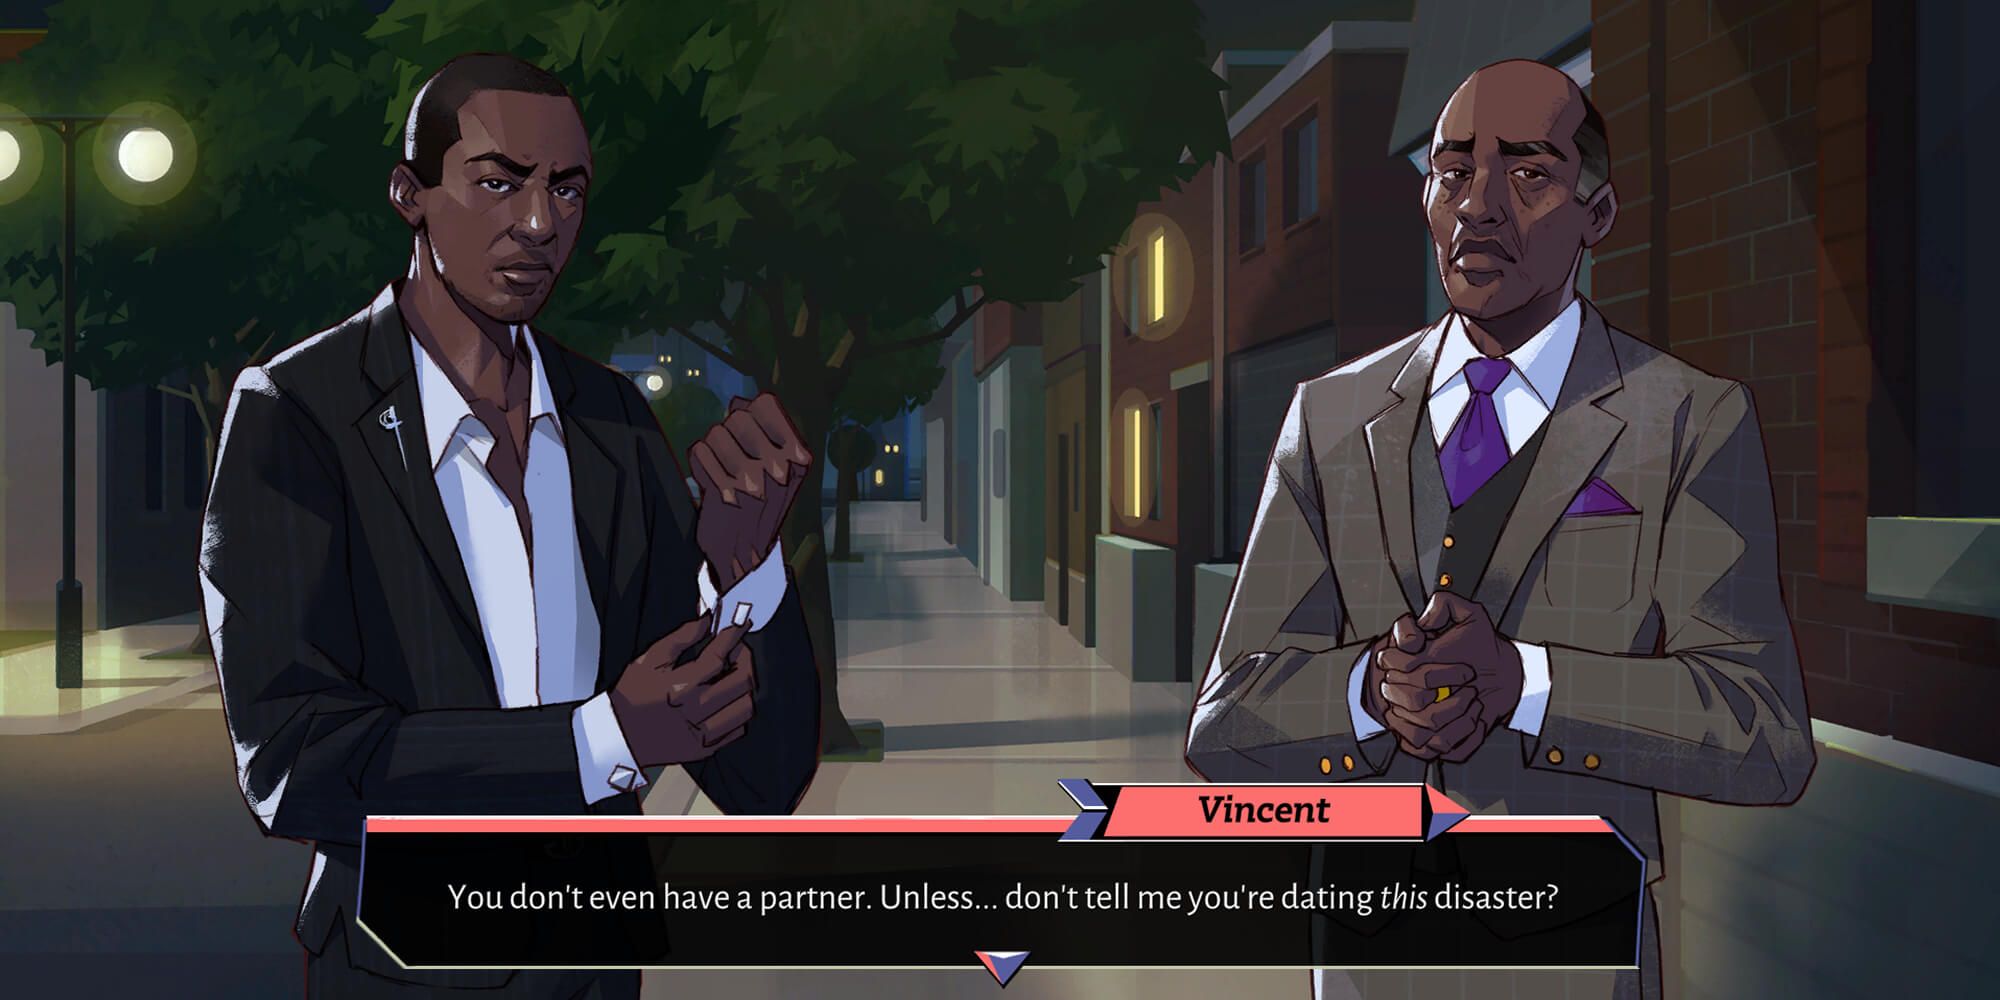 A Discussion Between Isaac And Vincent